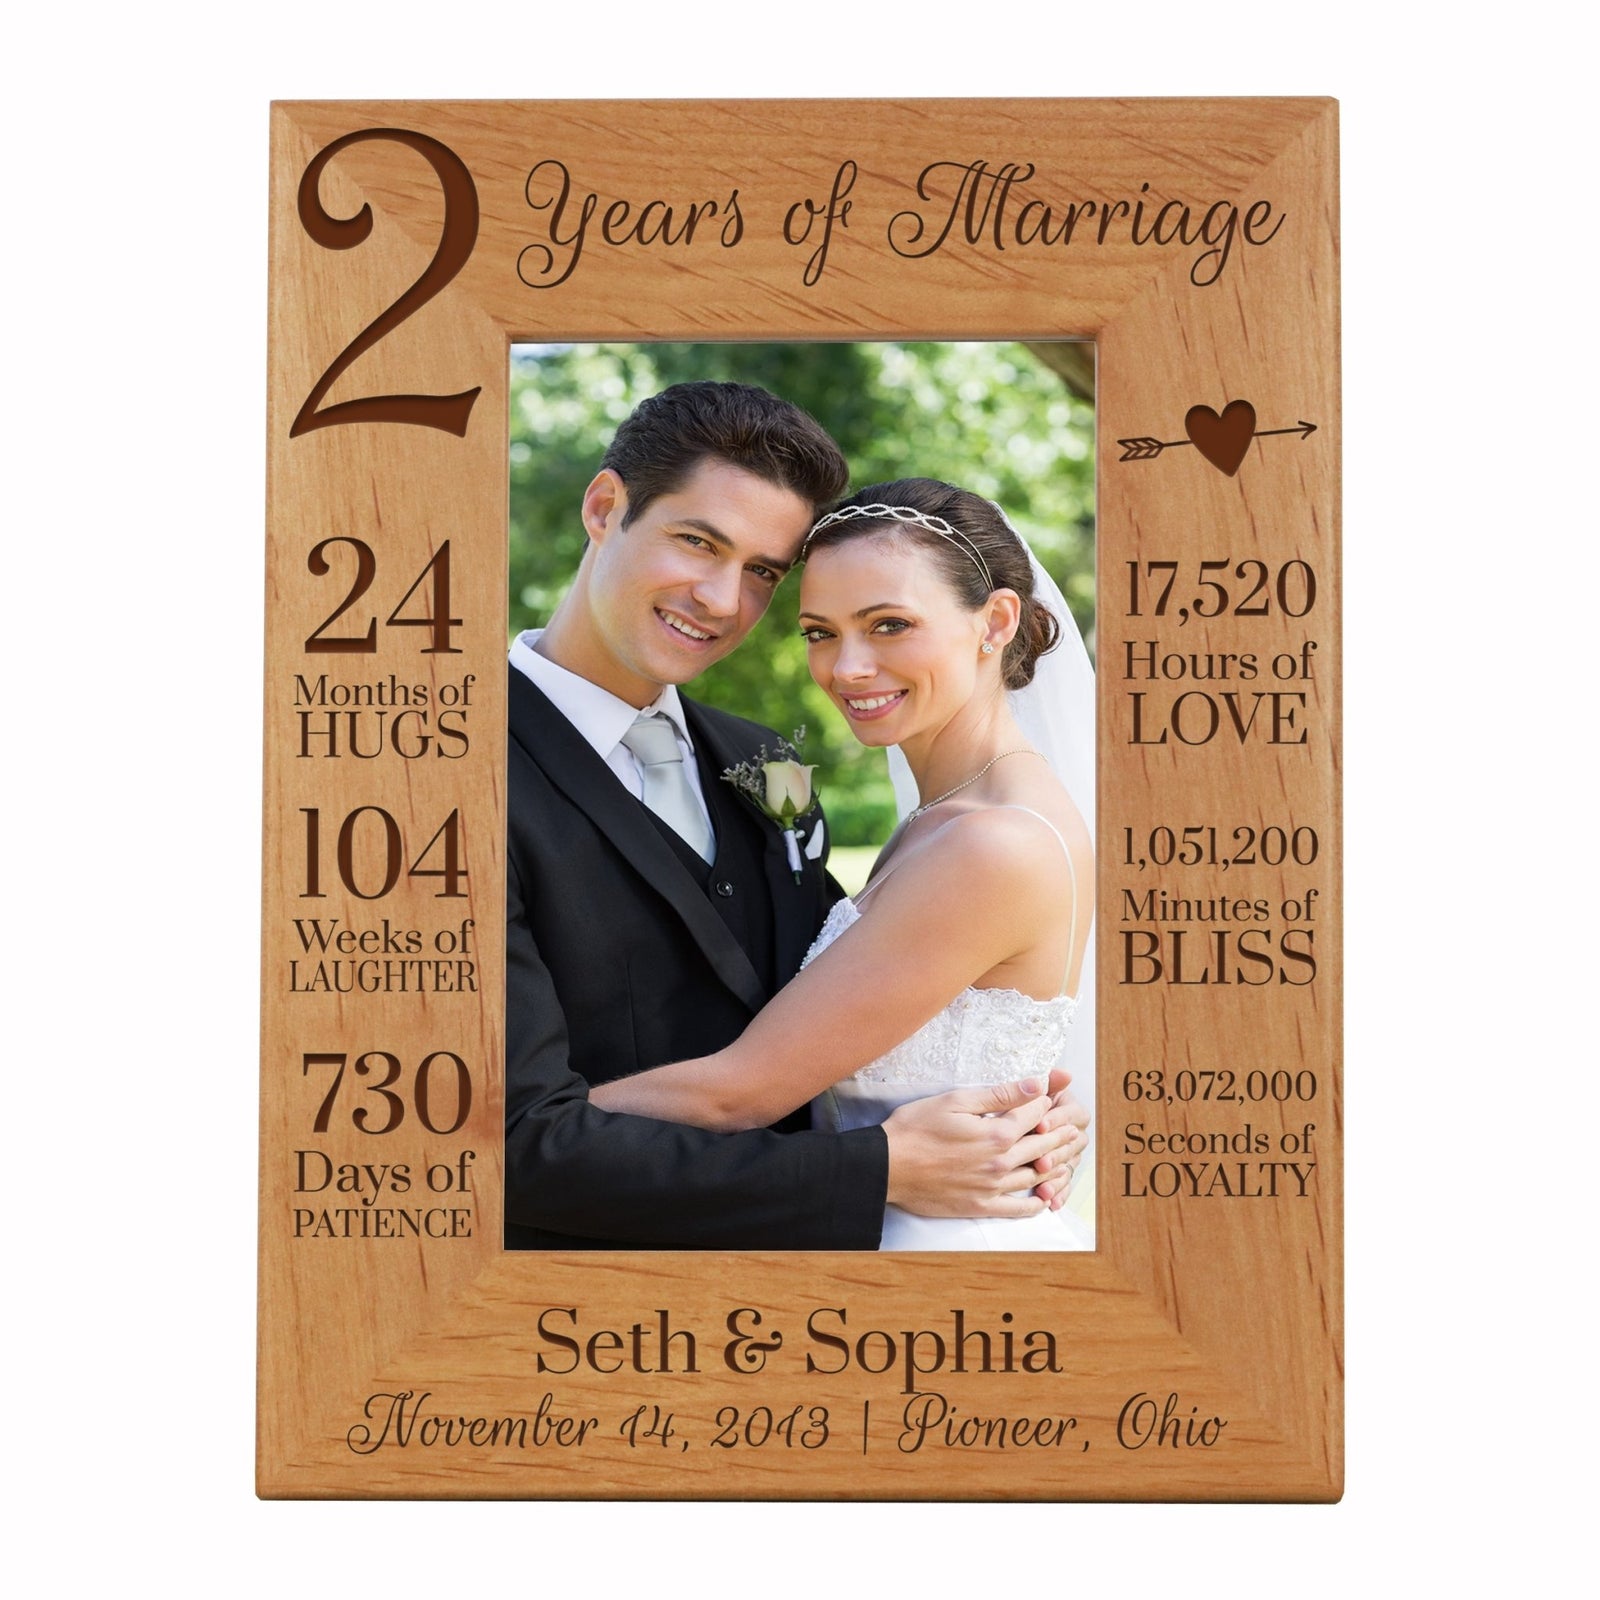 Lifesong Milestones Personalized Engraved 2nd Wedding Anniversary Photo Frame Wall Decor Gift for Couples